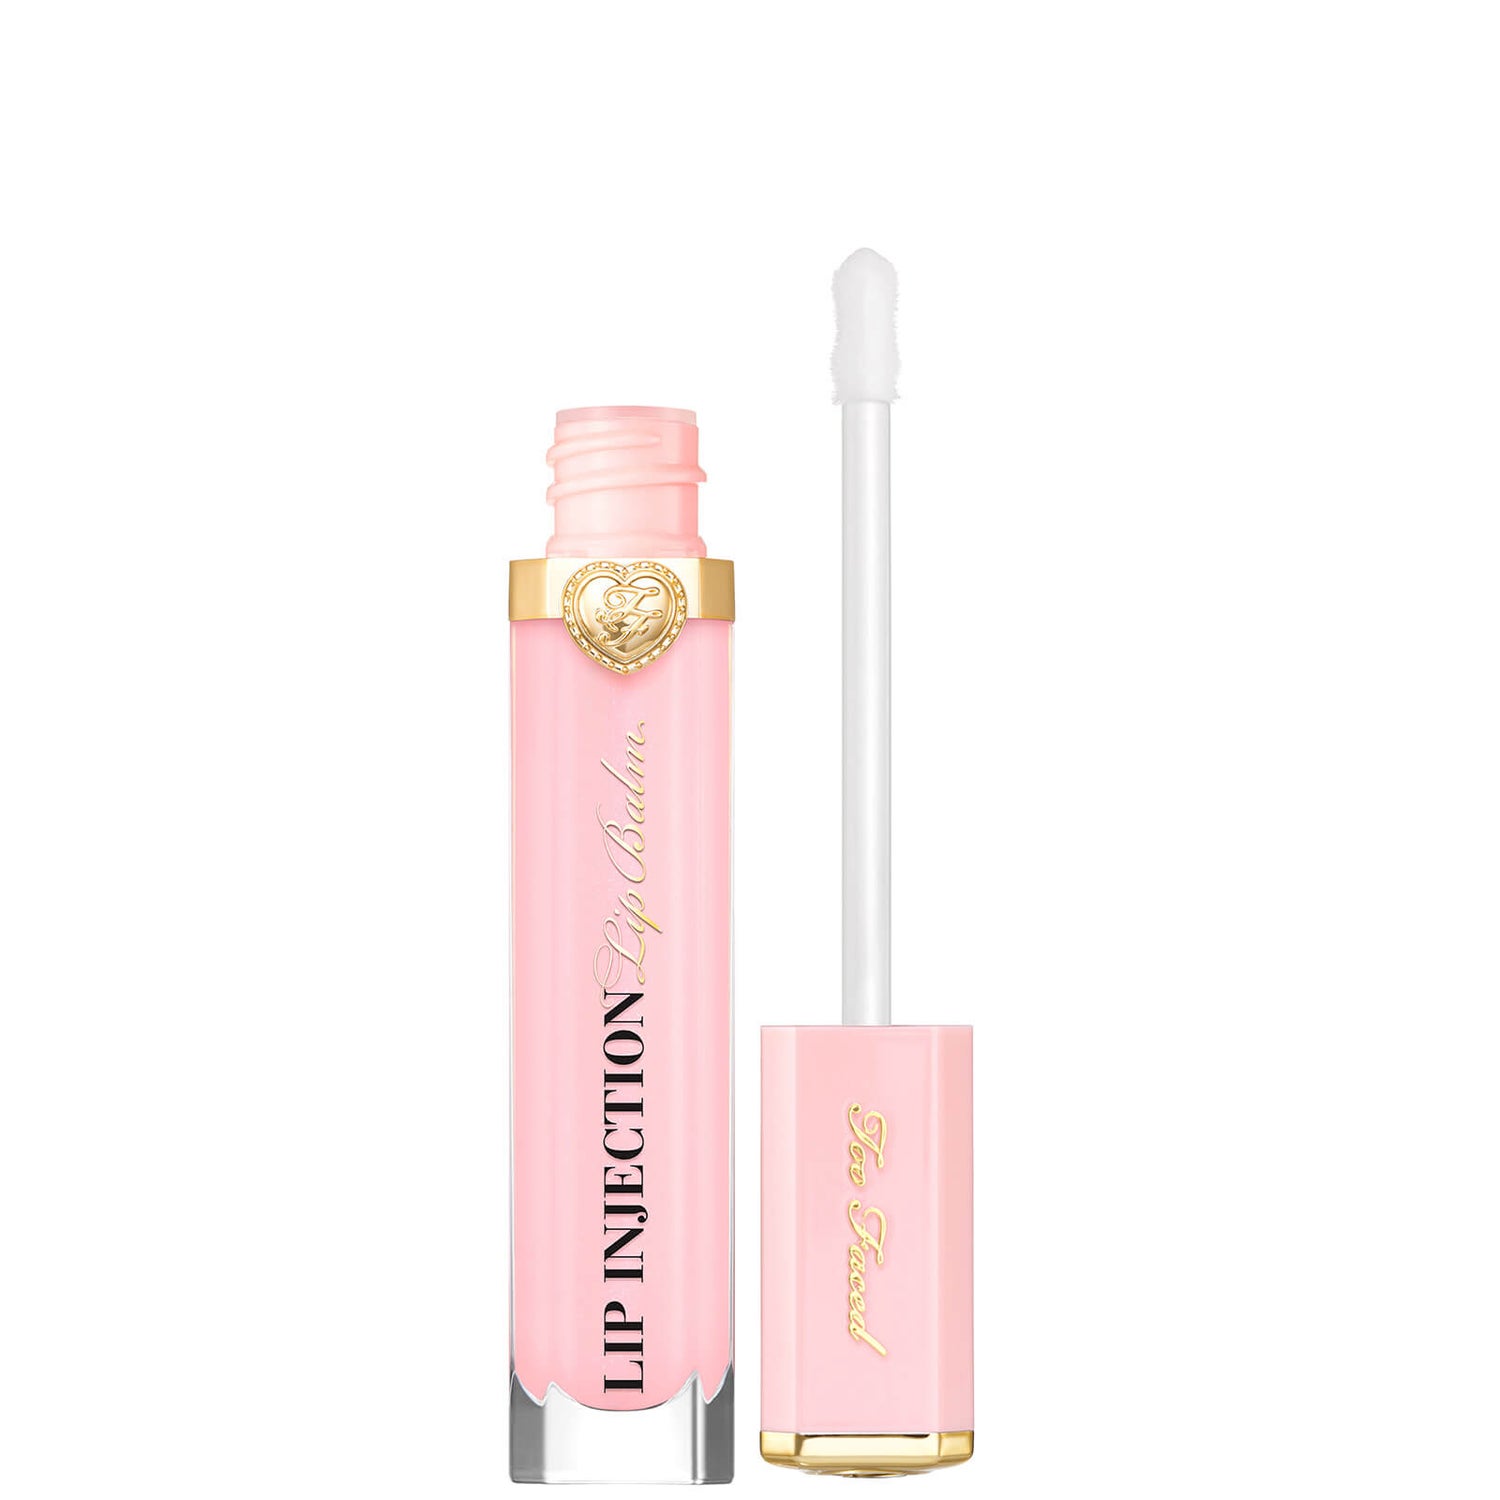 Too Faced Lip Injection Power Plumping Luxury Balm 7 ml